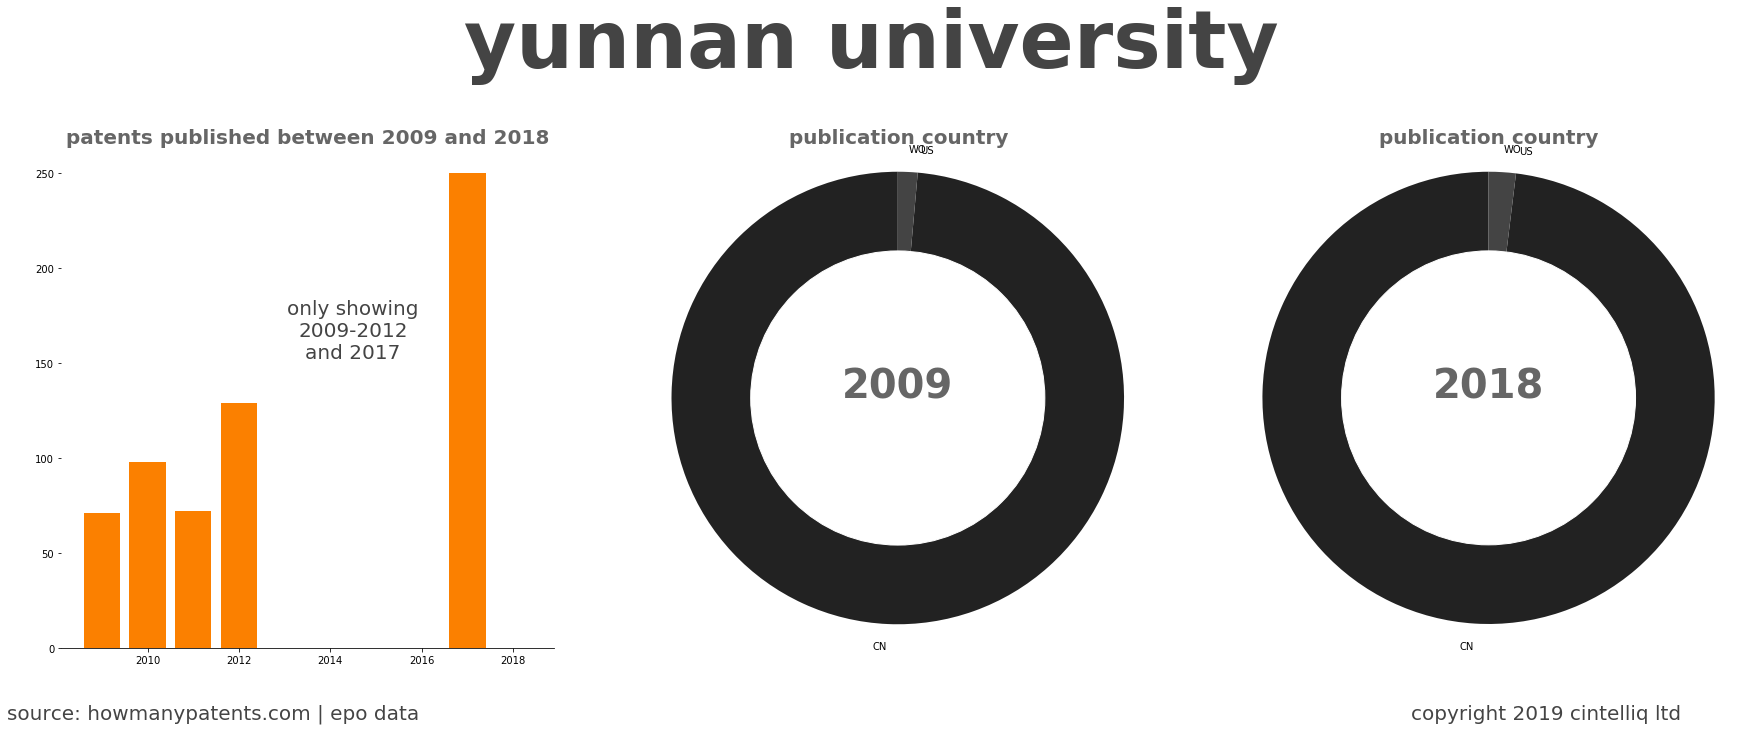 summary of patents for Yunnan University